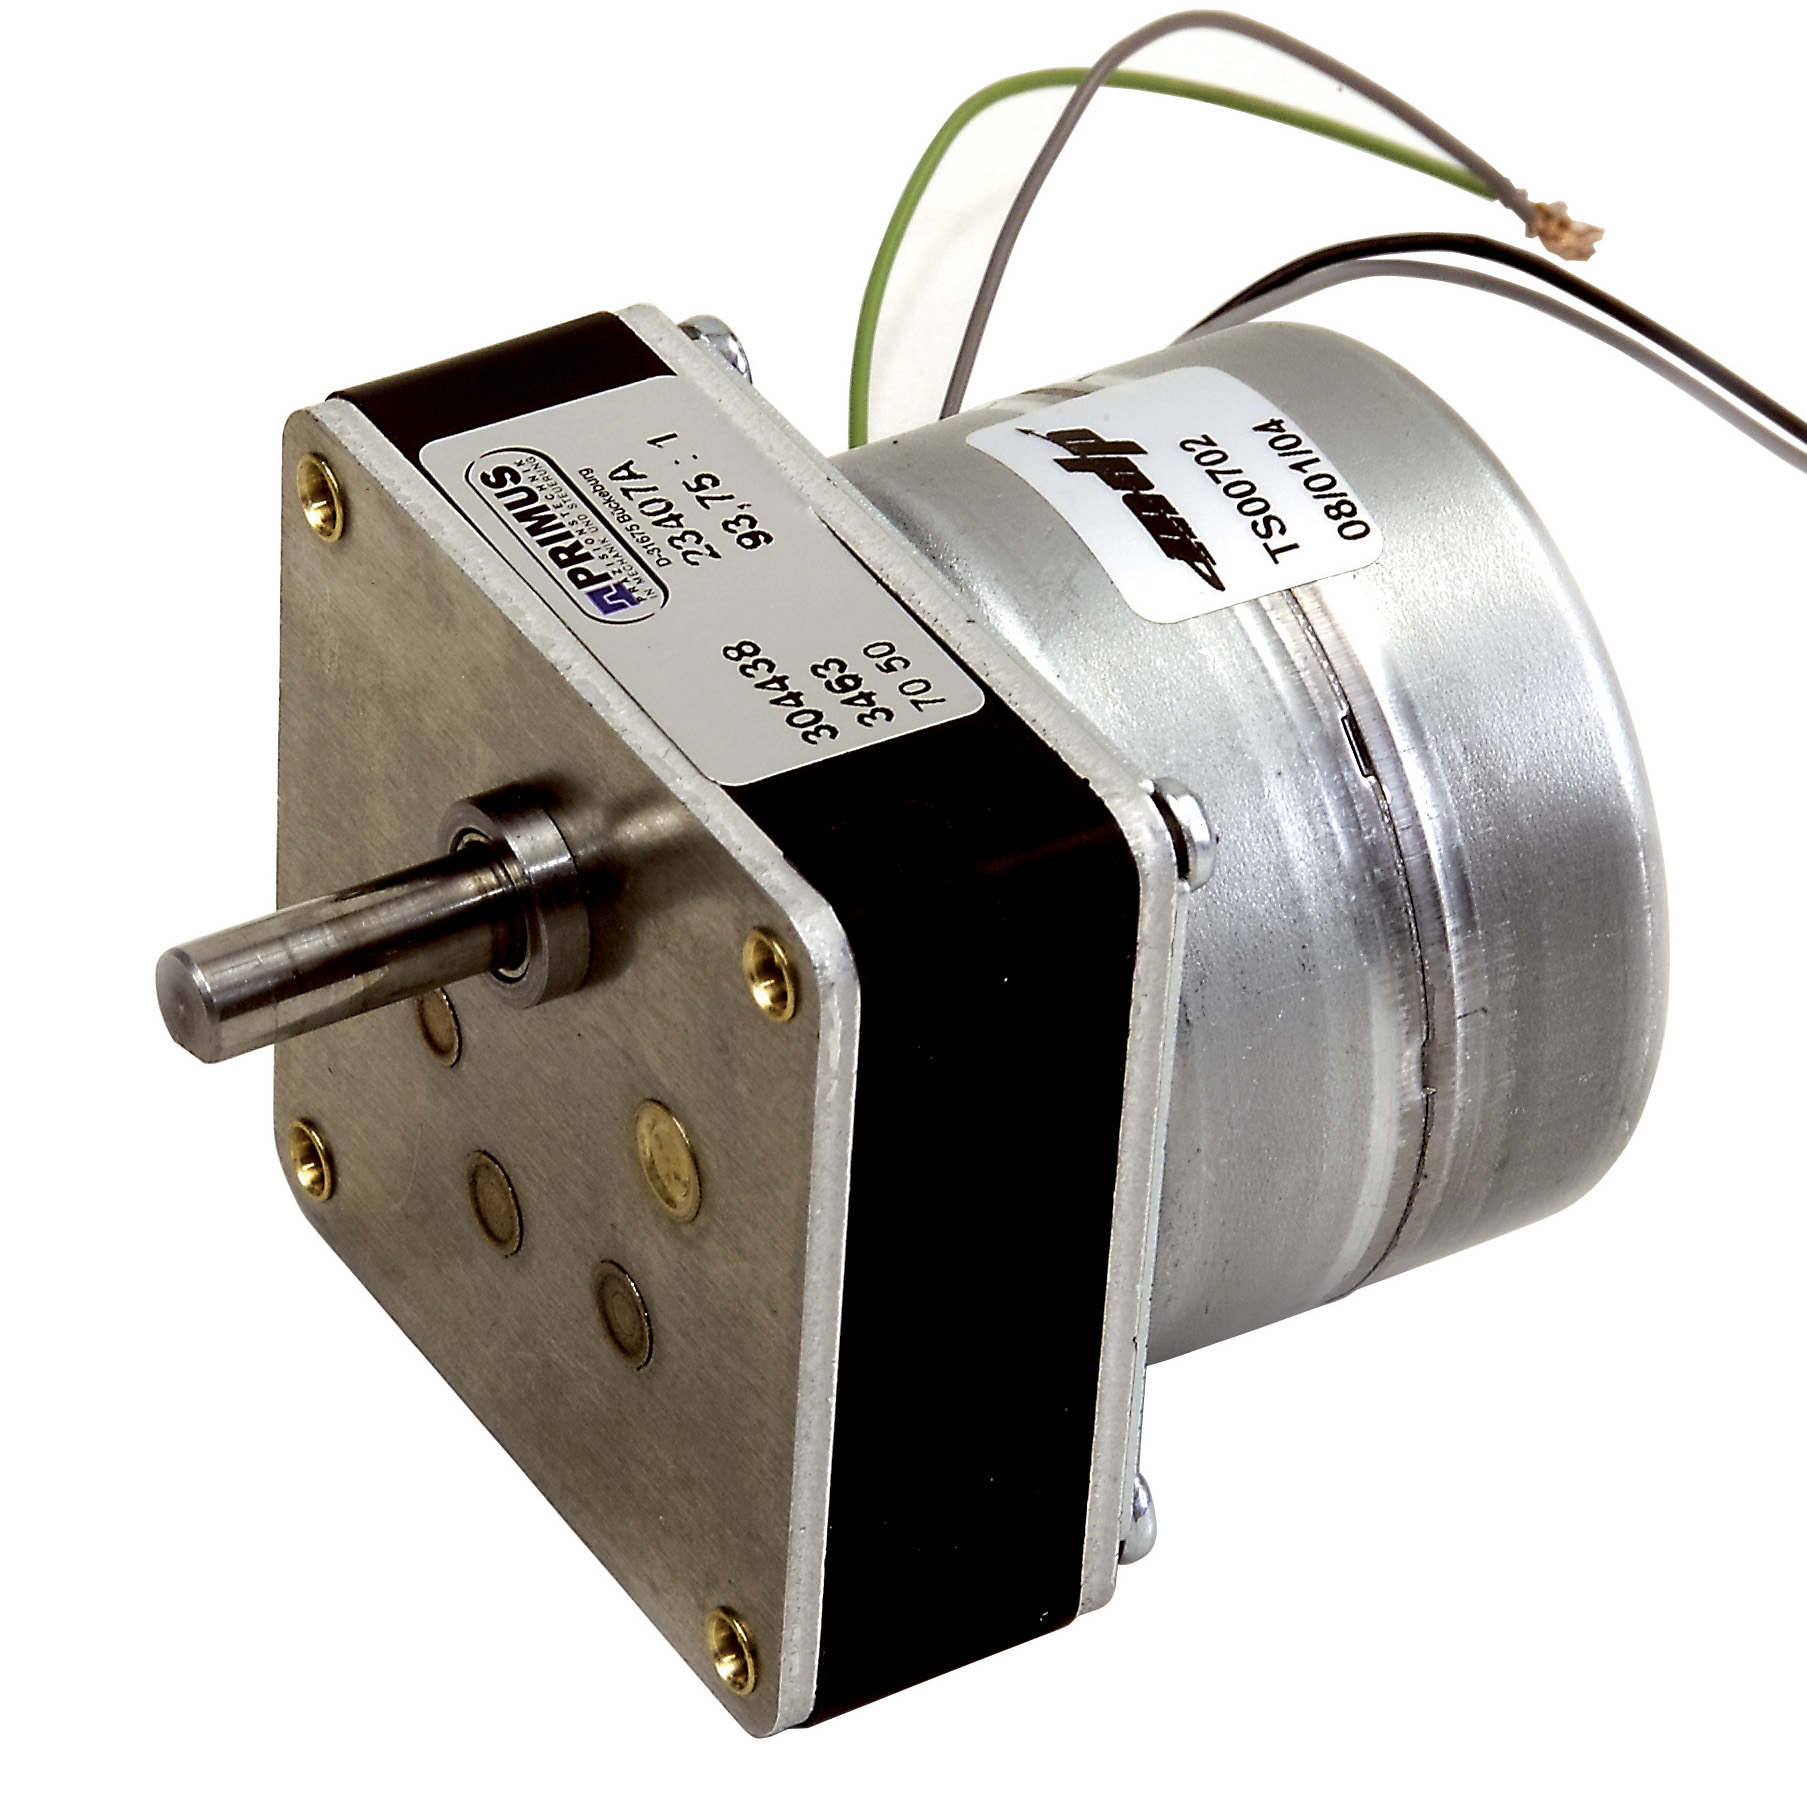 Synchronous AC Motor and- gearbox  - from 1.3 to 6Nm - de 0.5 à 31 - 230V